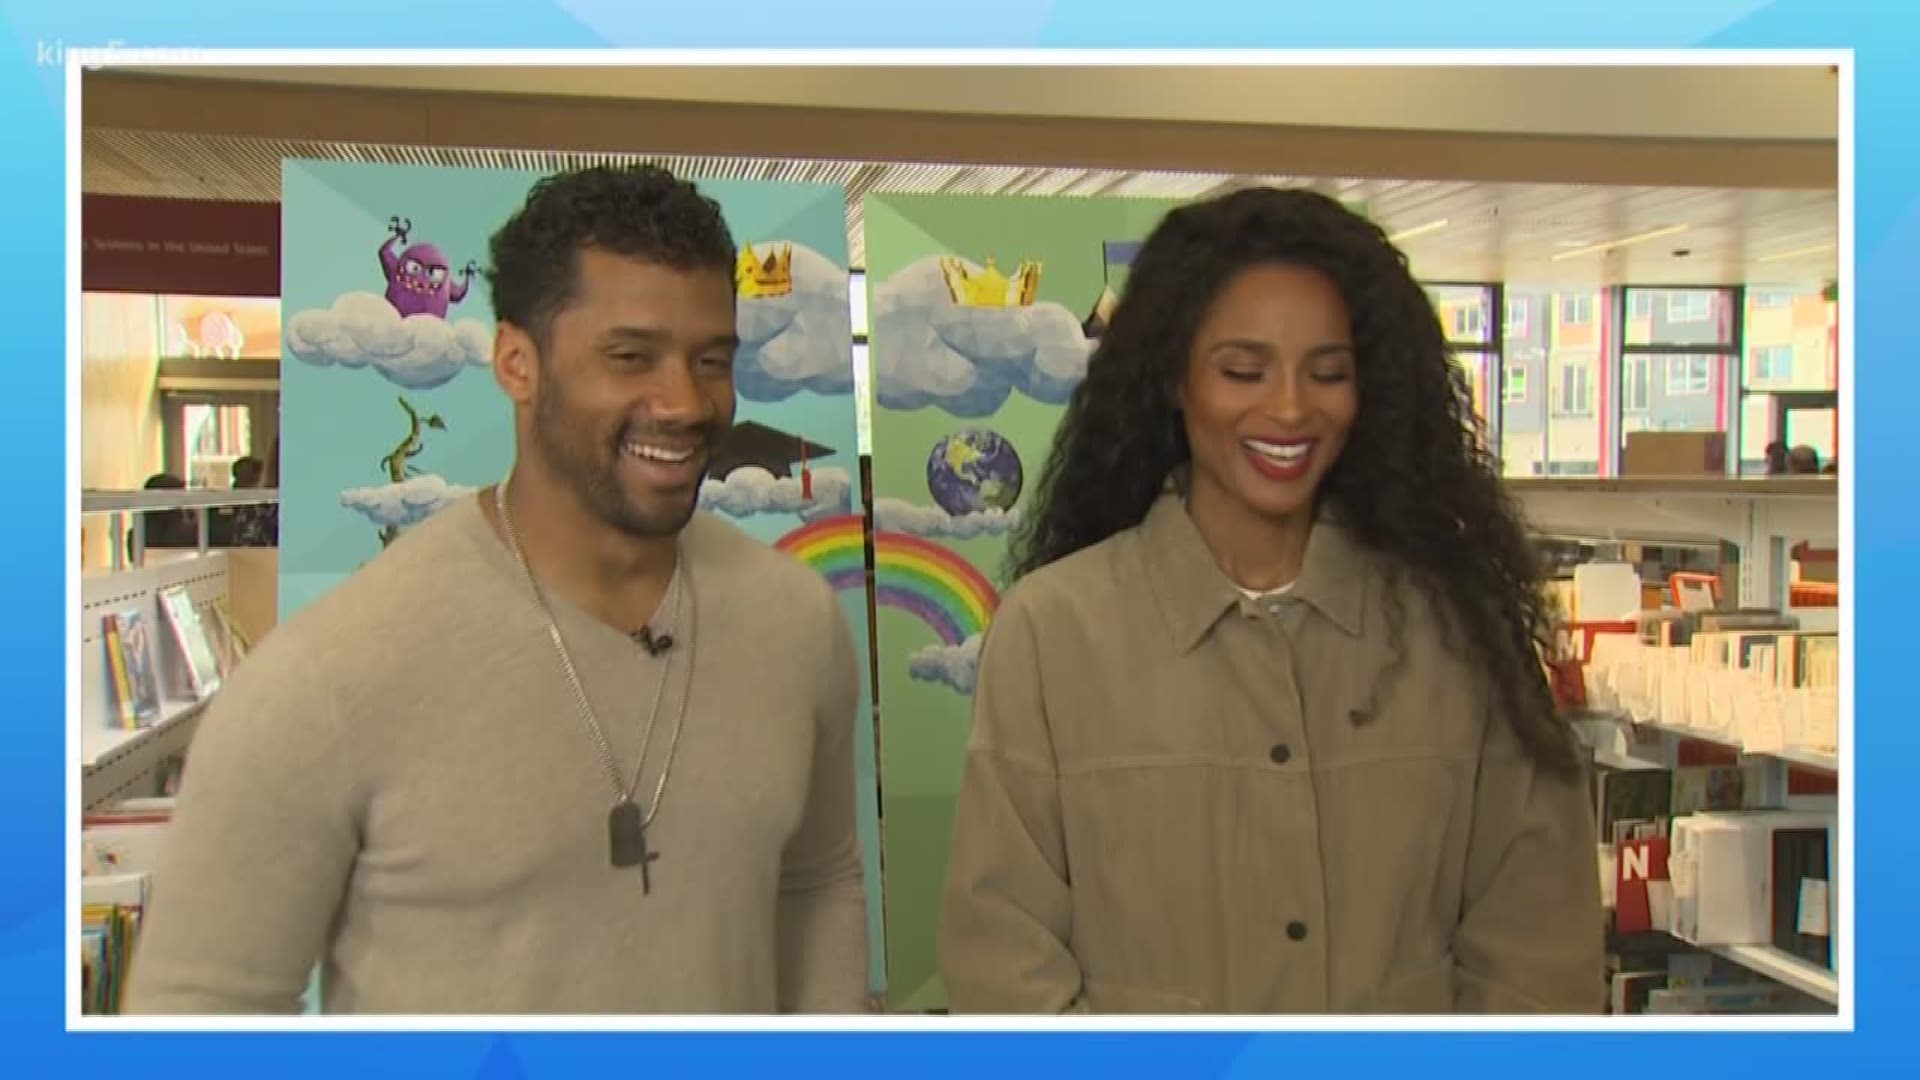 KING's Take 5 team looks at Russell Wilson's and wife Ciara's new push to get kids back into libraries - they're more than just a place to read!